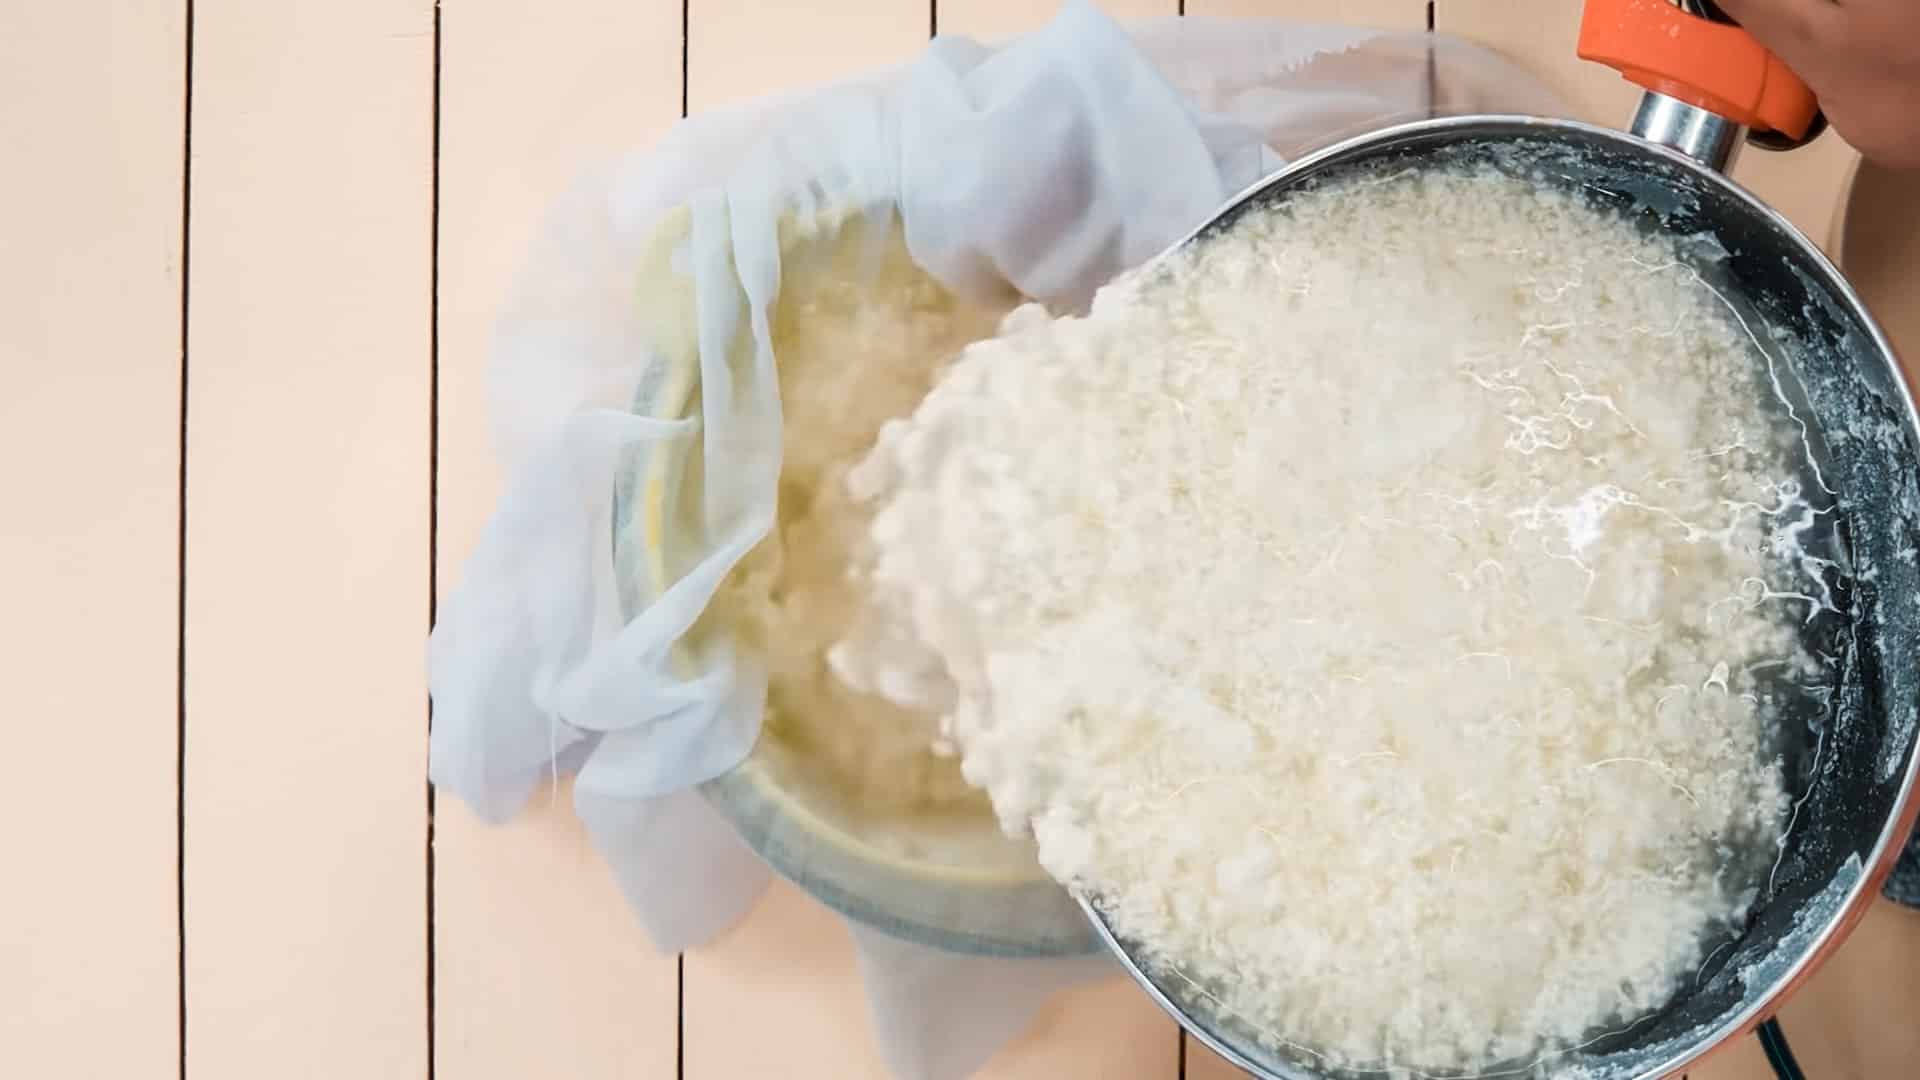 Separate the Curds and Whey